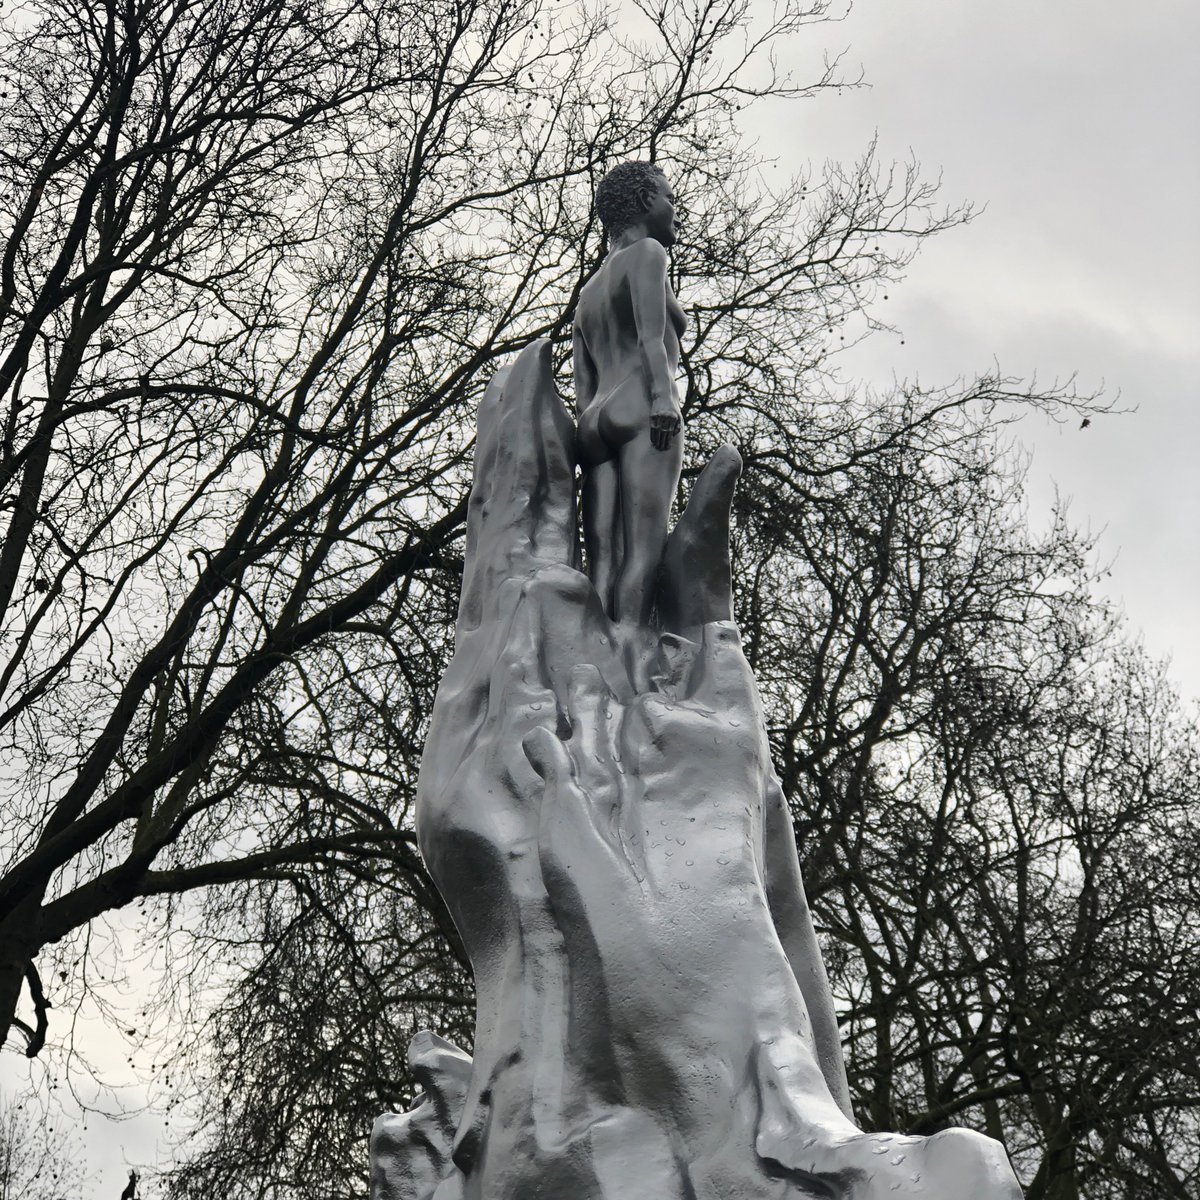 Finally made it to Newington Green to see the Wollstonecraft statue and I have some thoughts. What struck me most, quite aside from the content, was the poor quality of the finish. I didn’t understand the silver in reproduction, but even less in actuality...